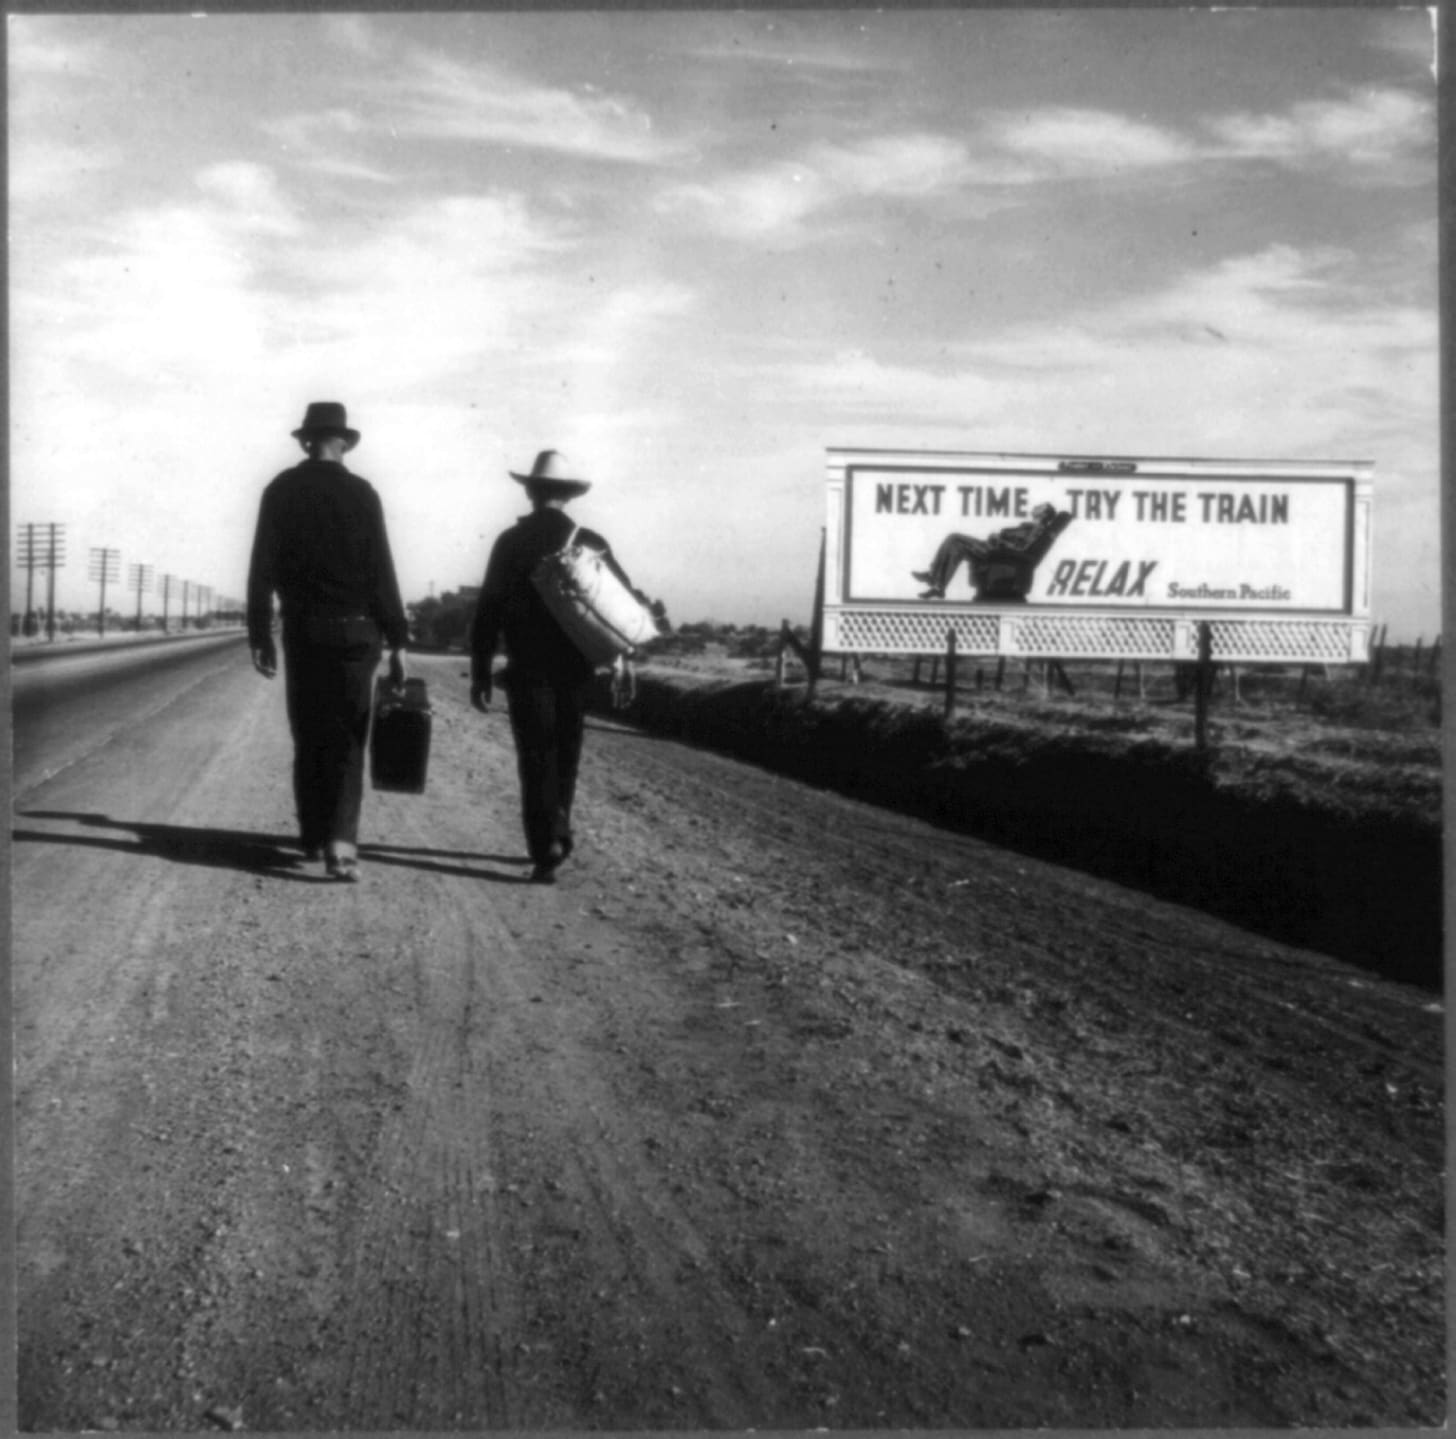 Photo shows two people walking (hitchhiking?) along road near a billboard that says "Next time, try the train. Relax." 